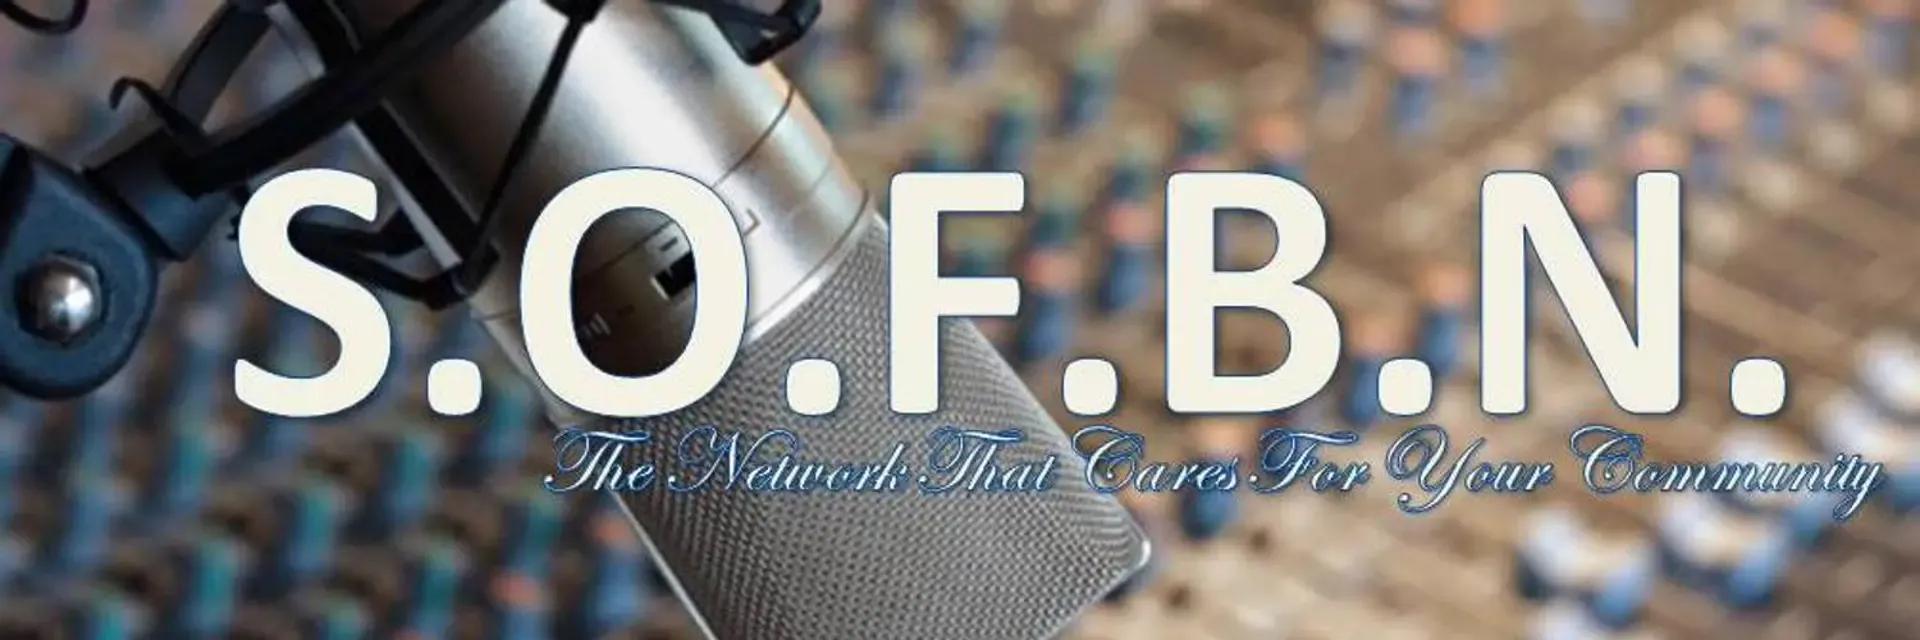 Shield of Faith Broadcasting Network